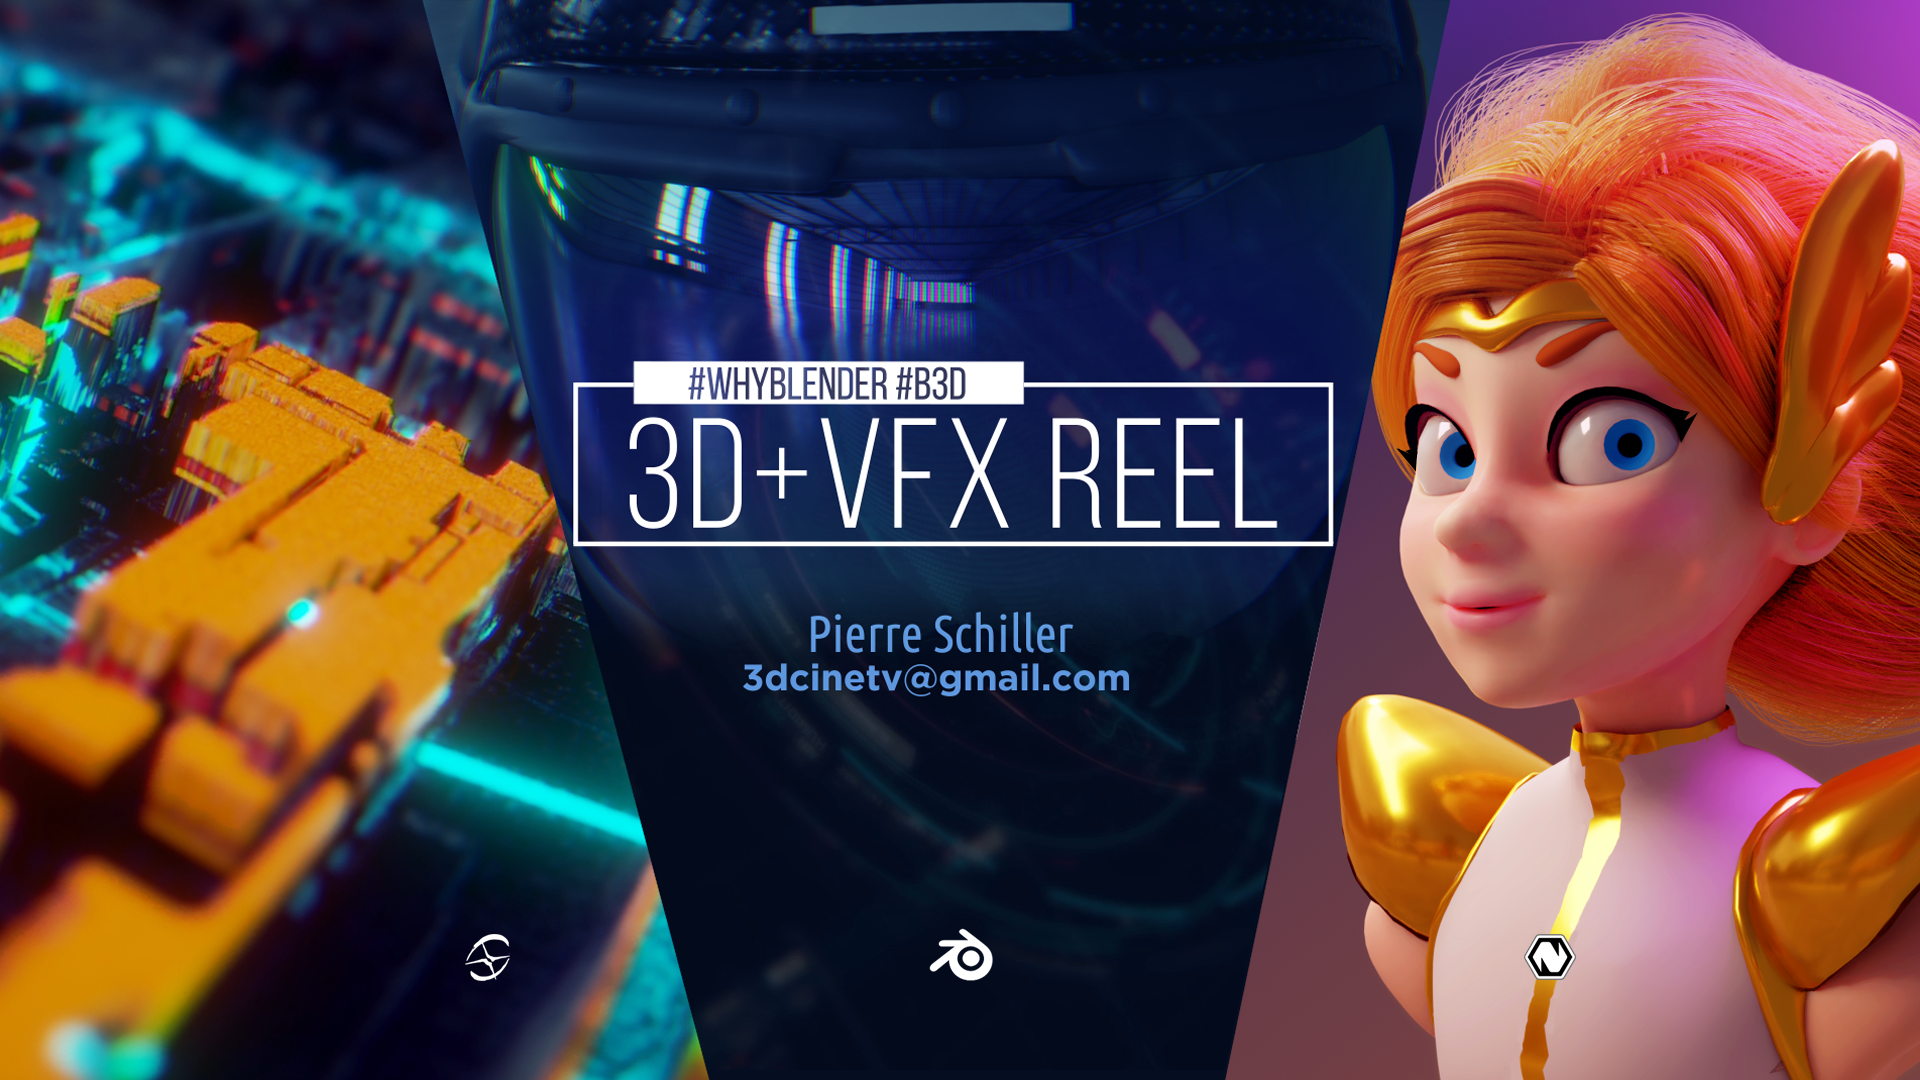 3D and VFX reel